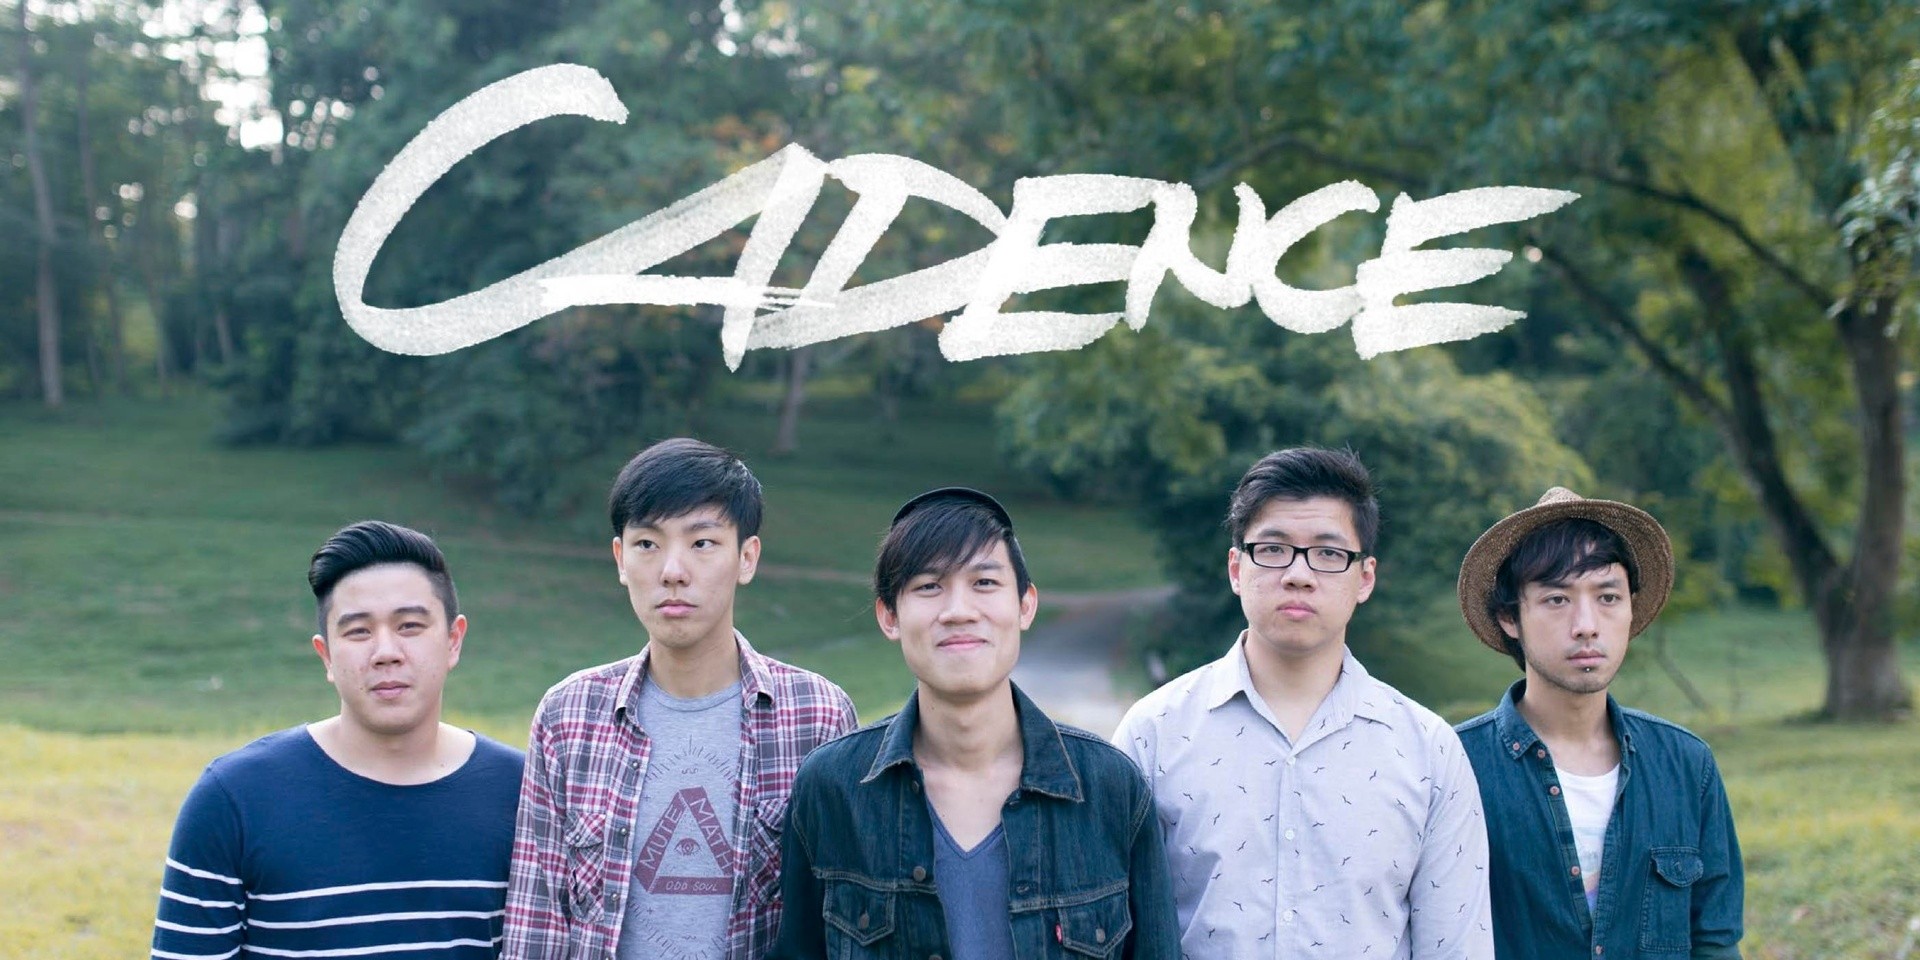 Local band Cadence aspires for greater Heights with Debut EP